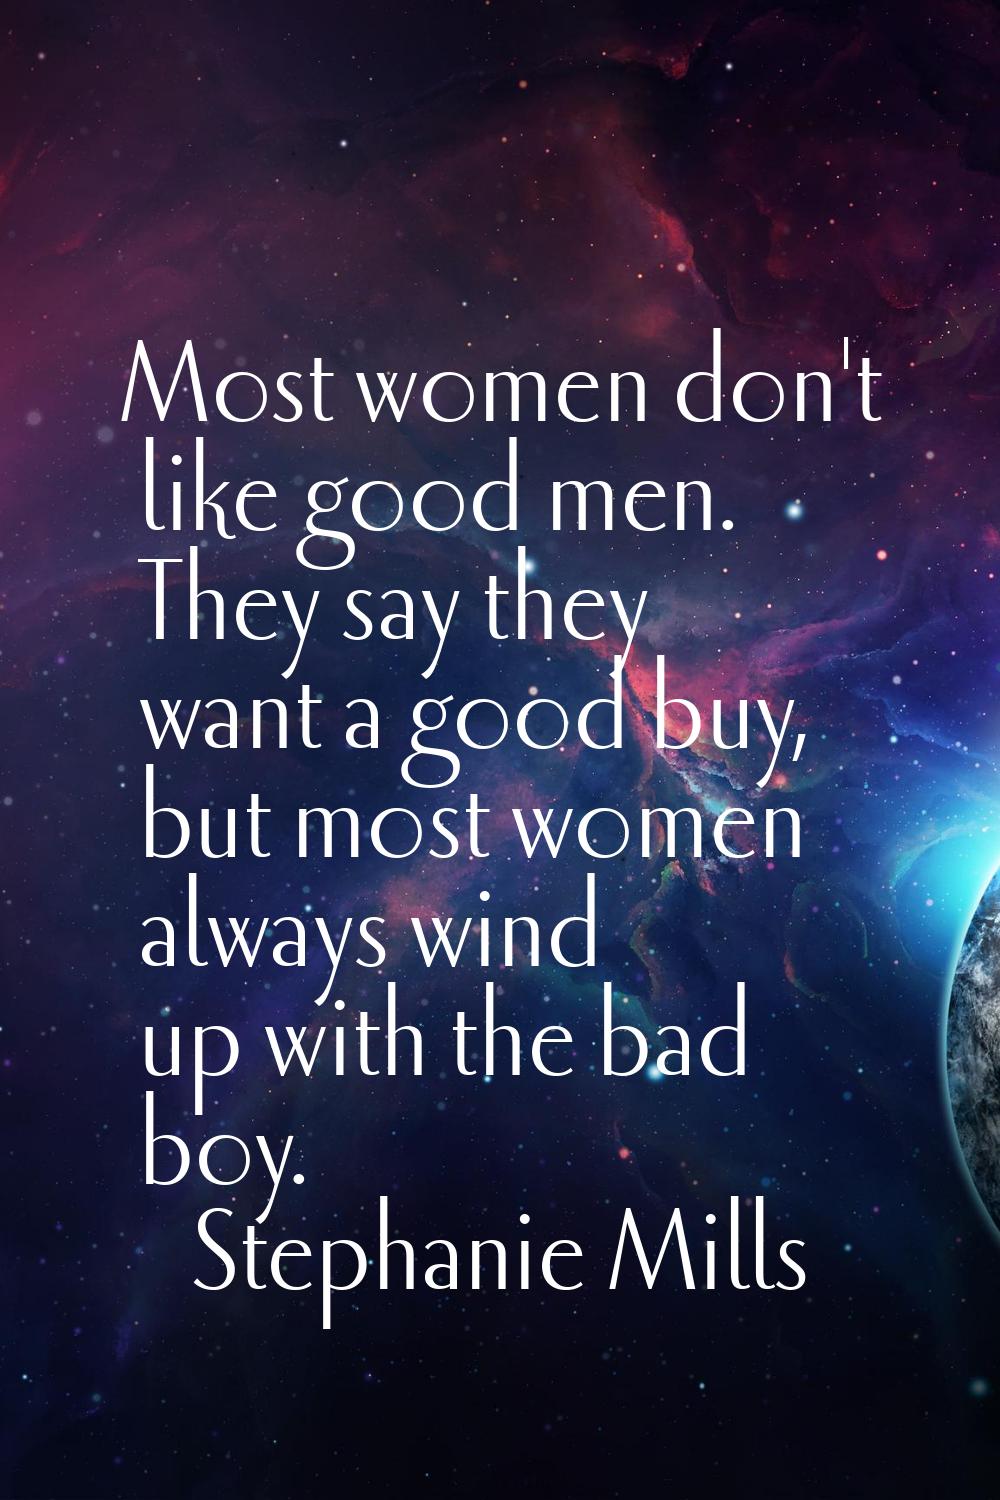 Most women don't like good men. They say they want a good buy, but most women always wind up with t